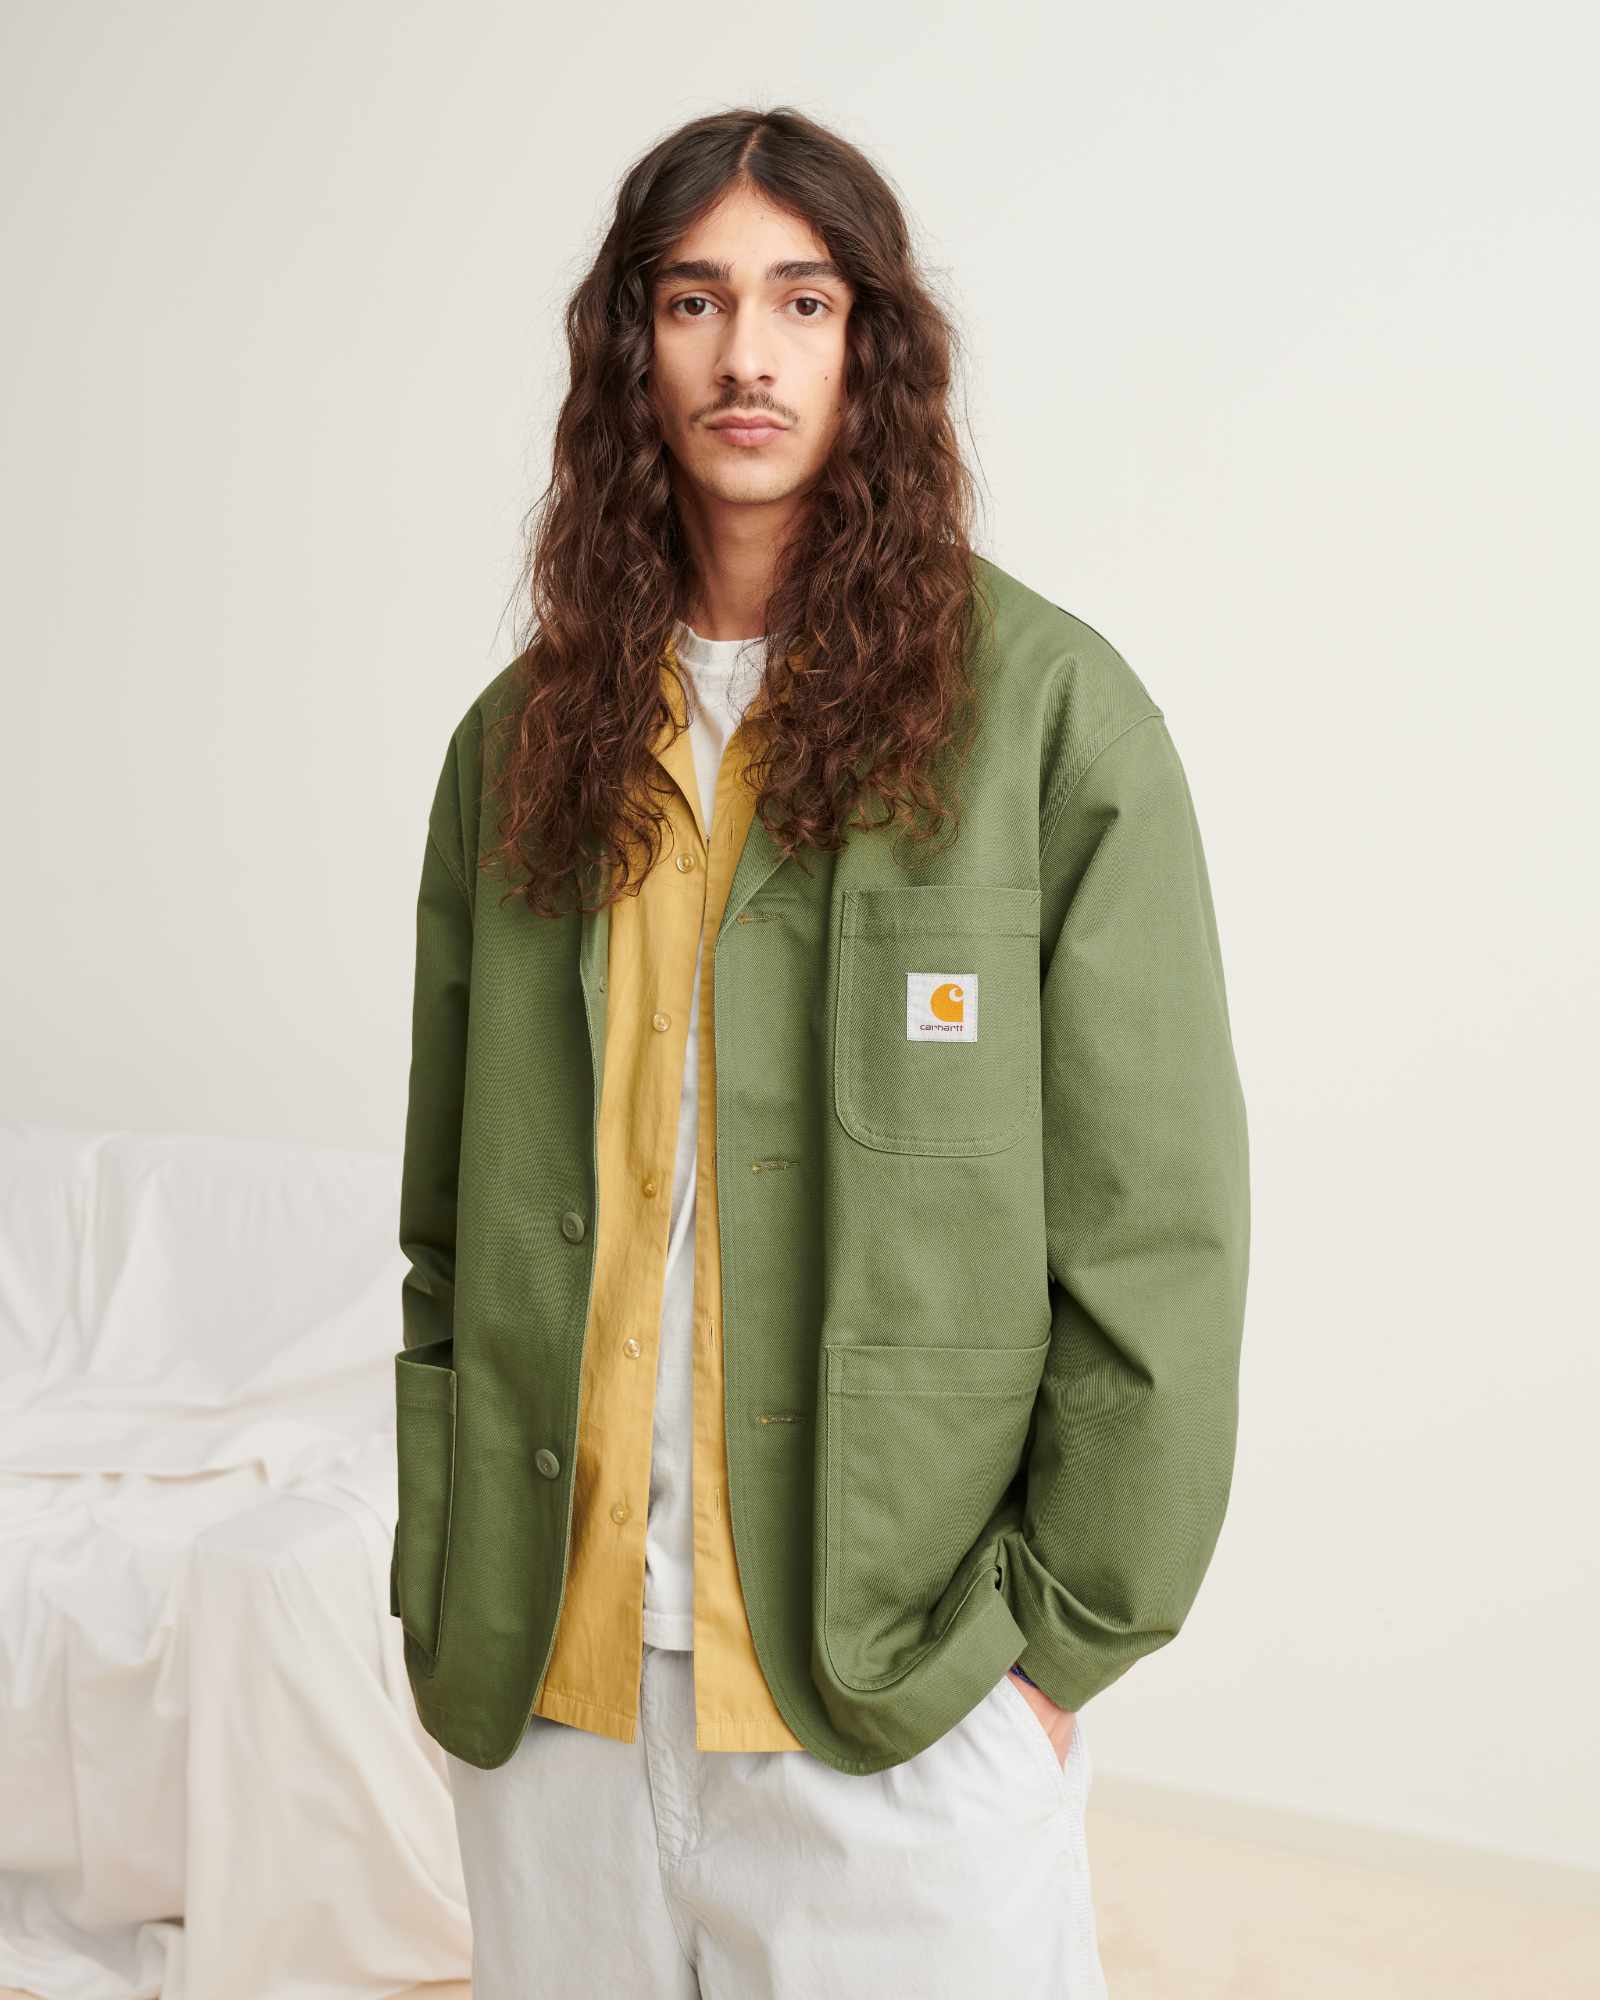 Carhartt WIP Spring/Summer 2024 Is French Riviera-Ready